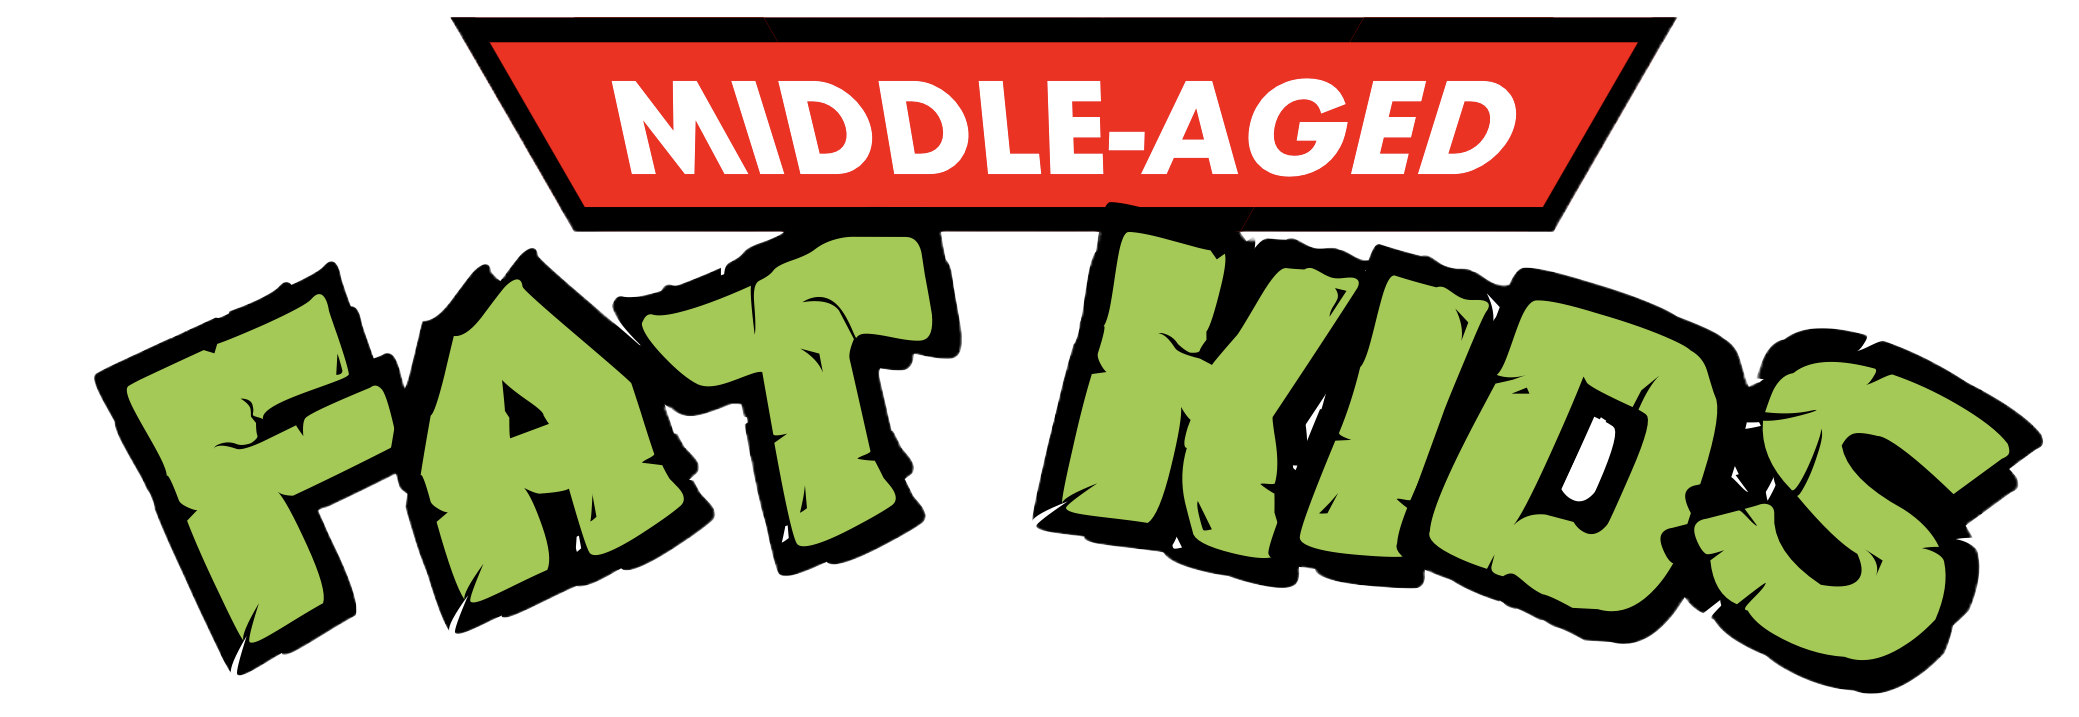 Middle-Aged Fat Kids